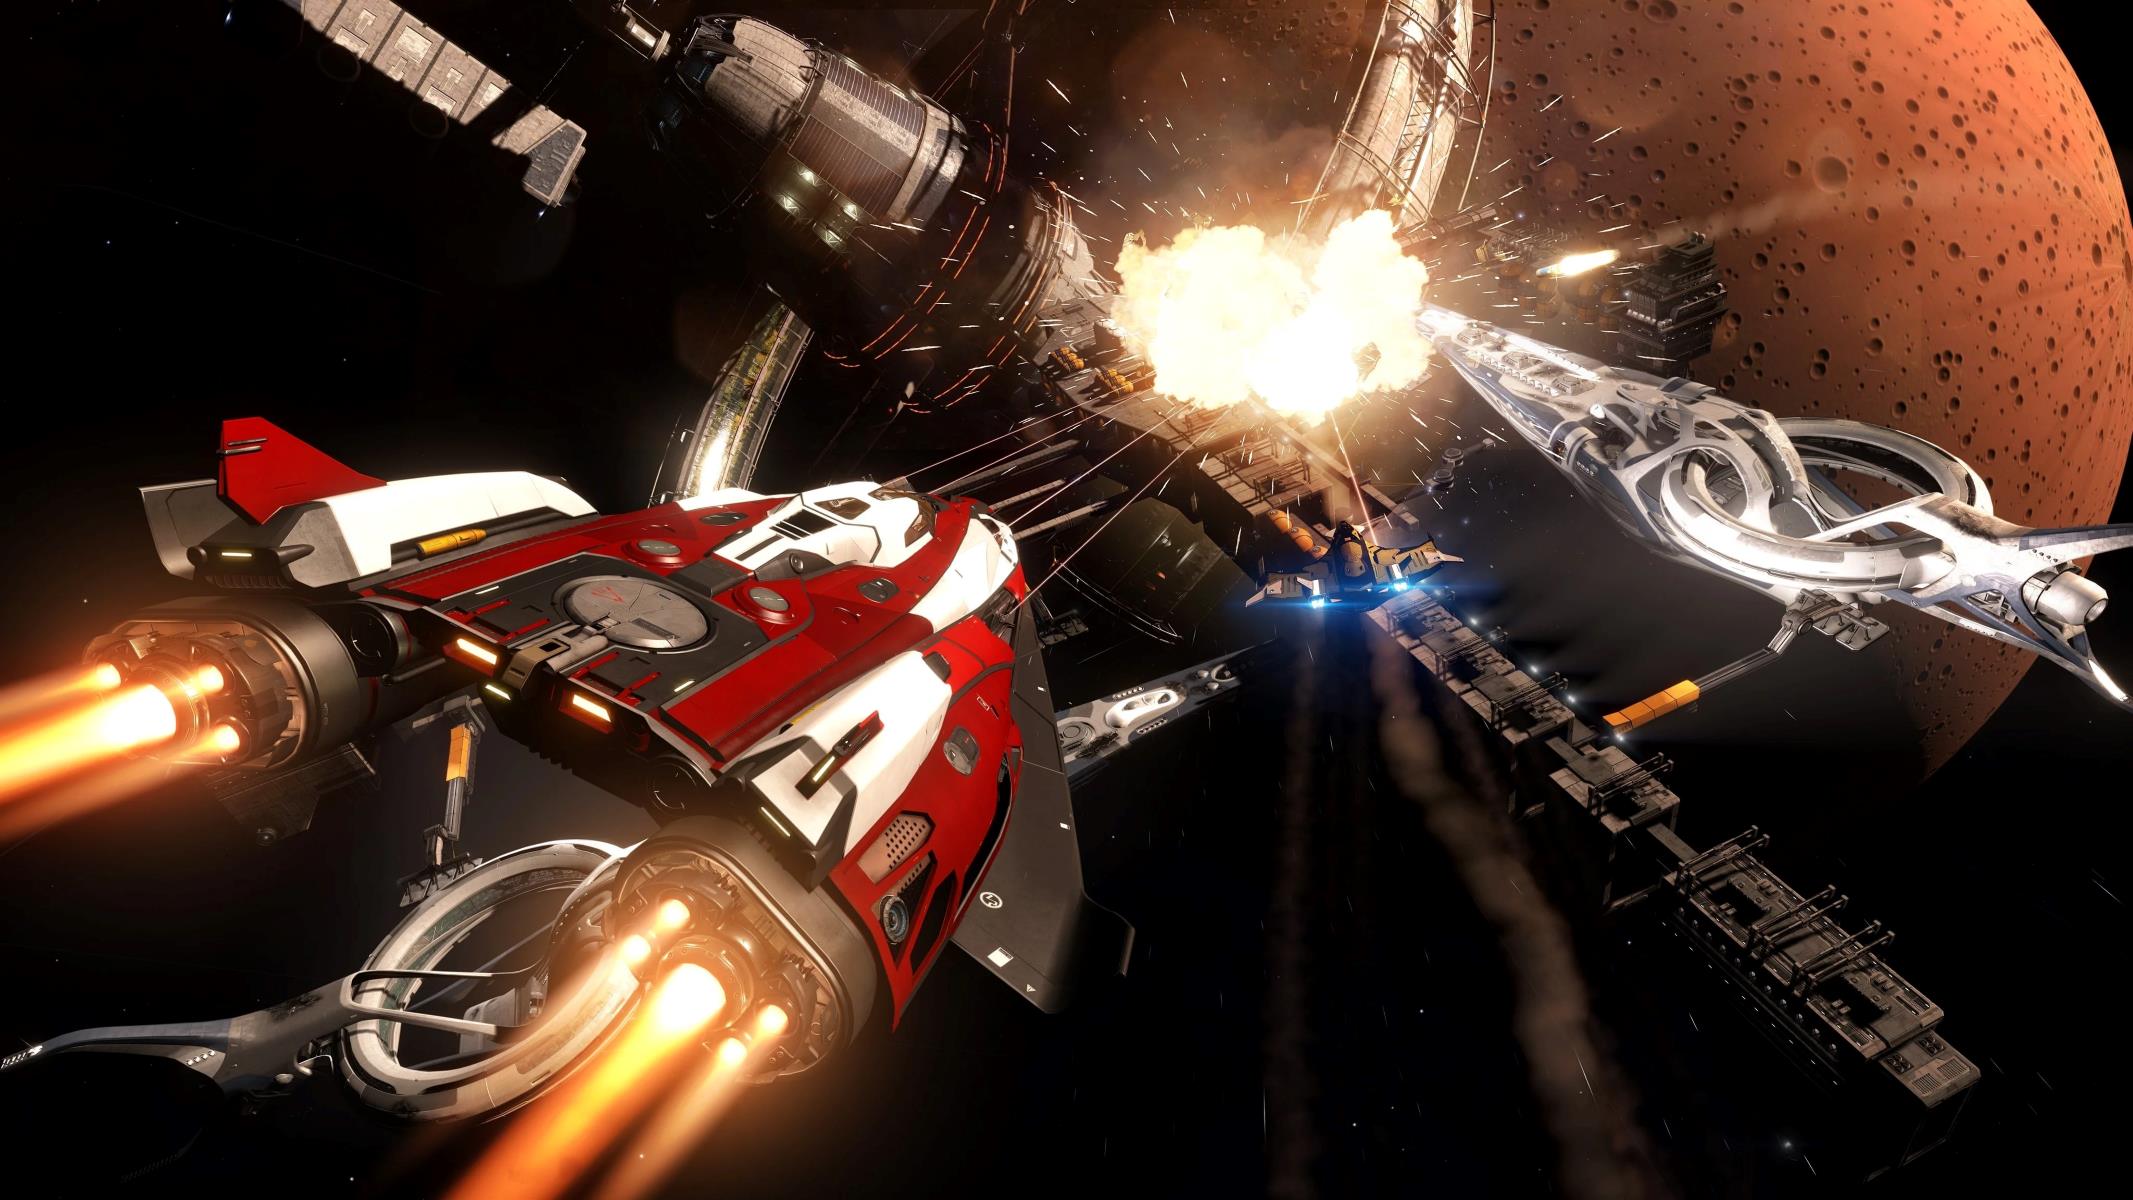 Configuring Your Gamepad For Elite Dangerous: Step-by-Step Instructions